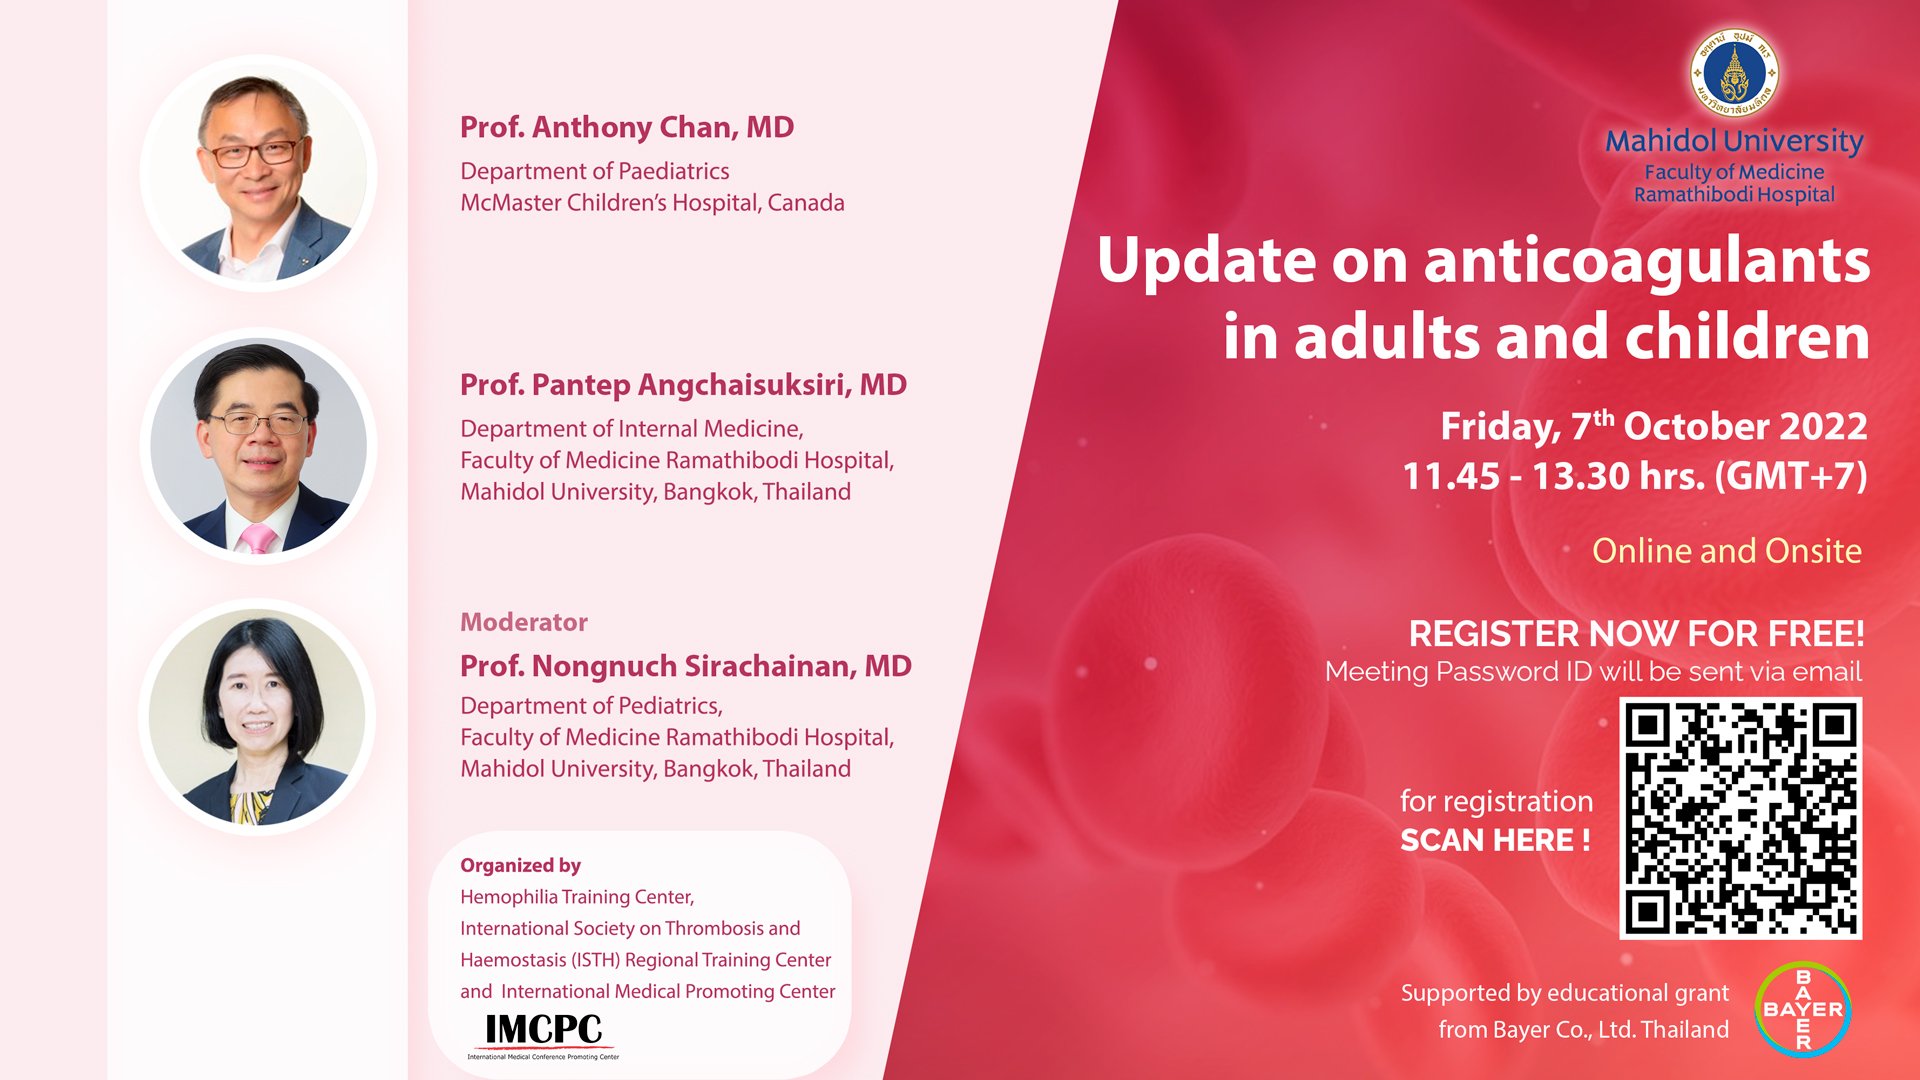 Update on anticoagulants in adults and children